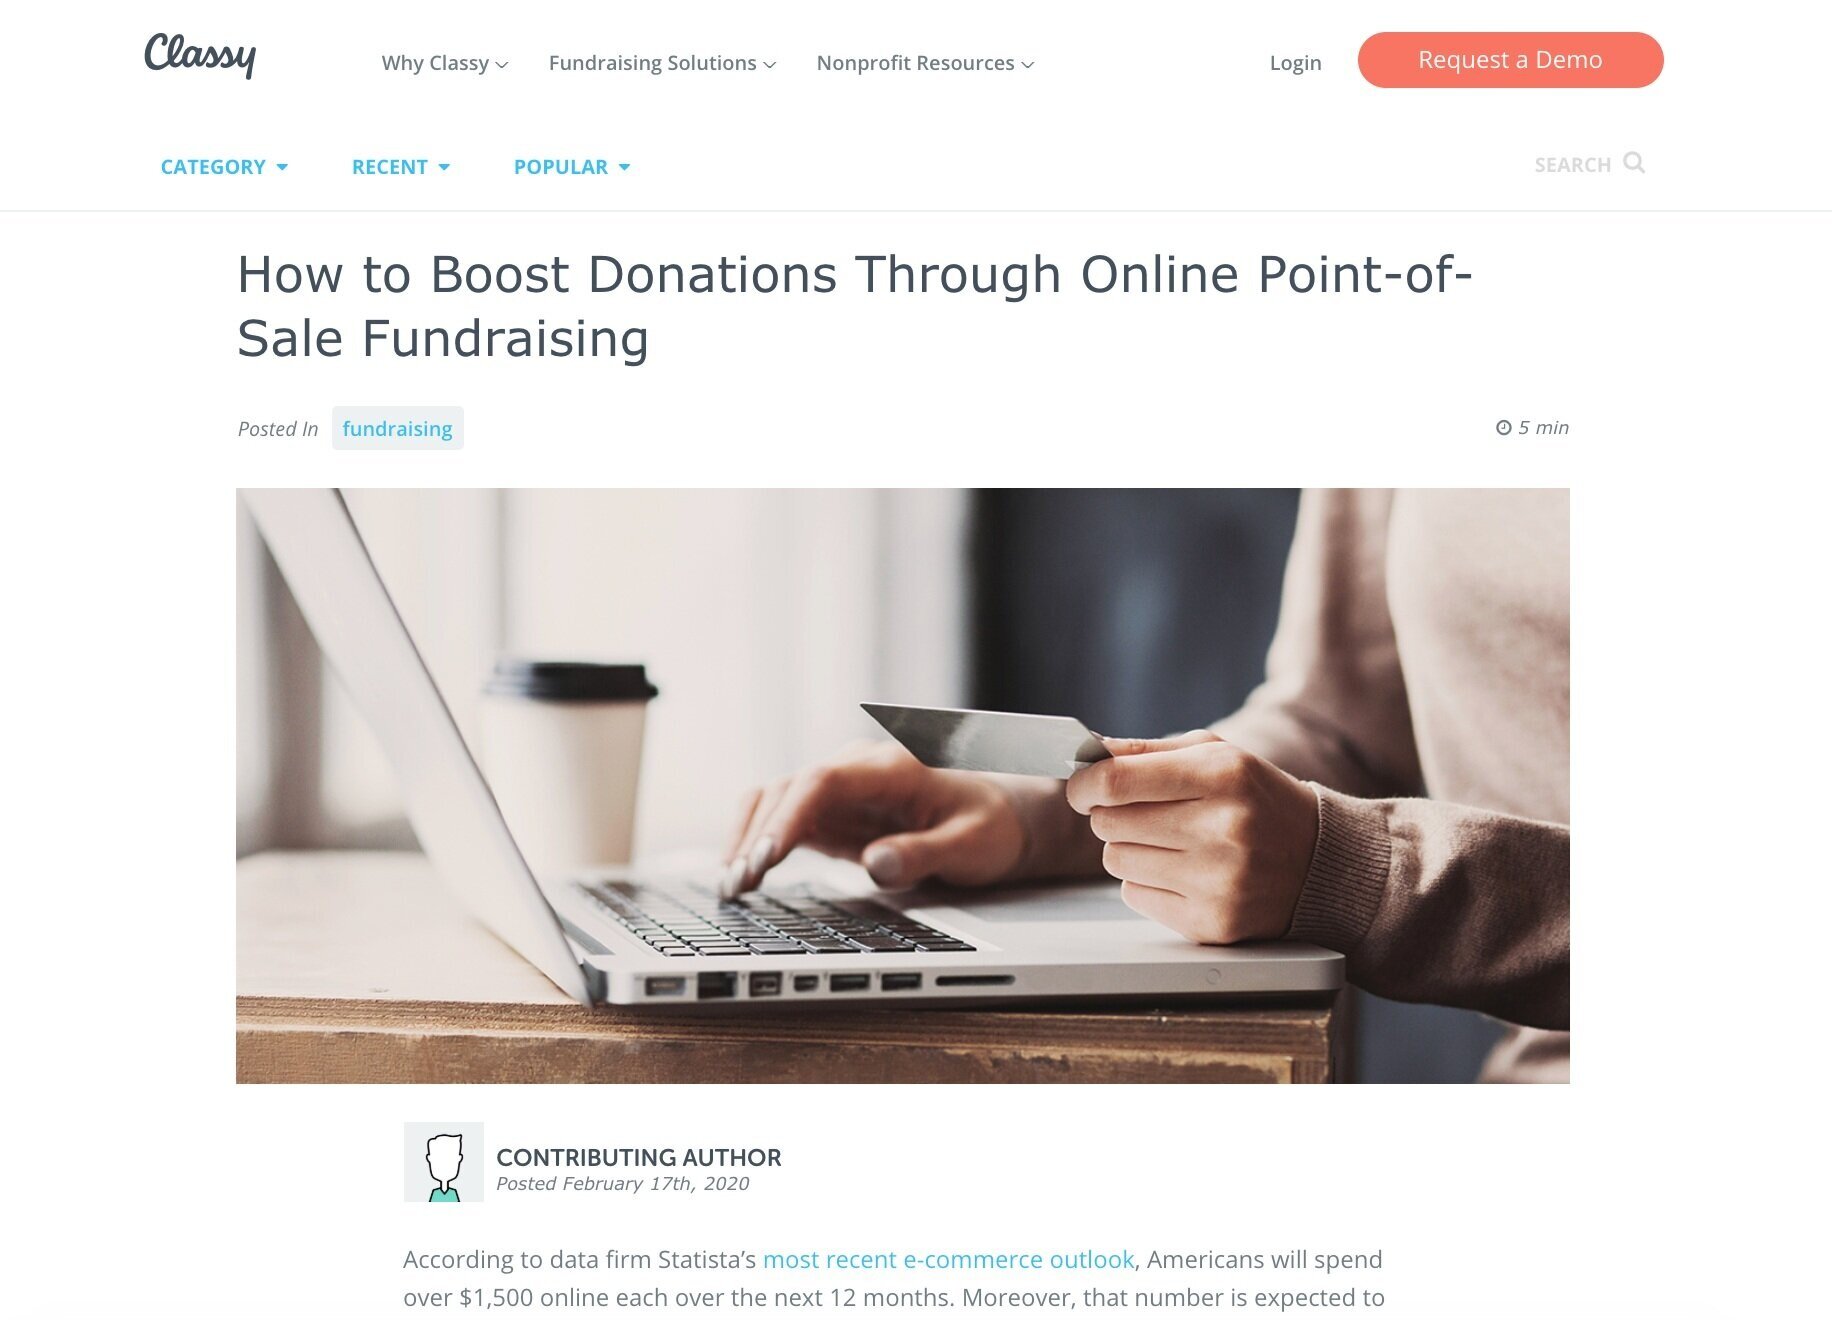 Classy.org Guest Post: Fundraising Through Online Shopping